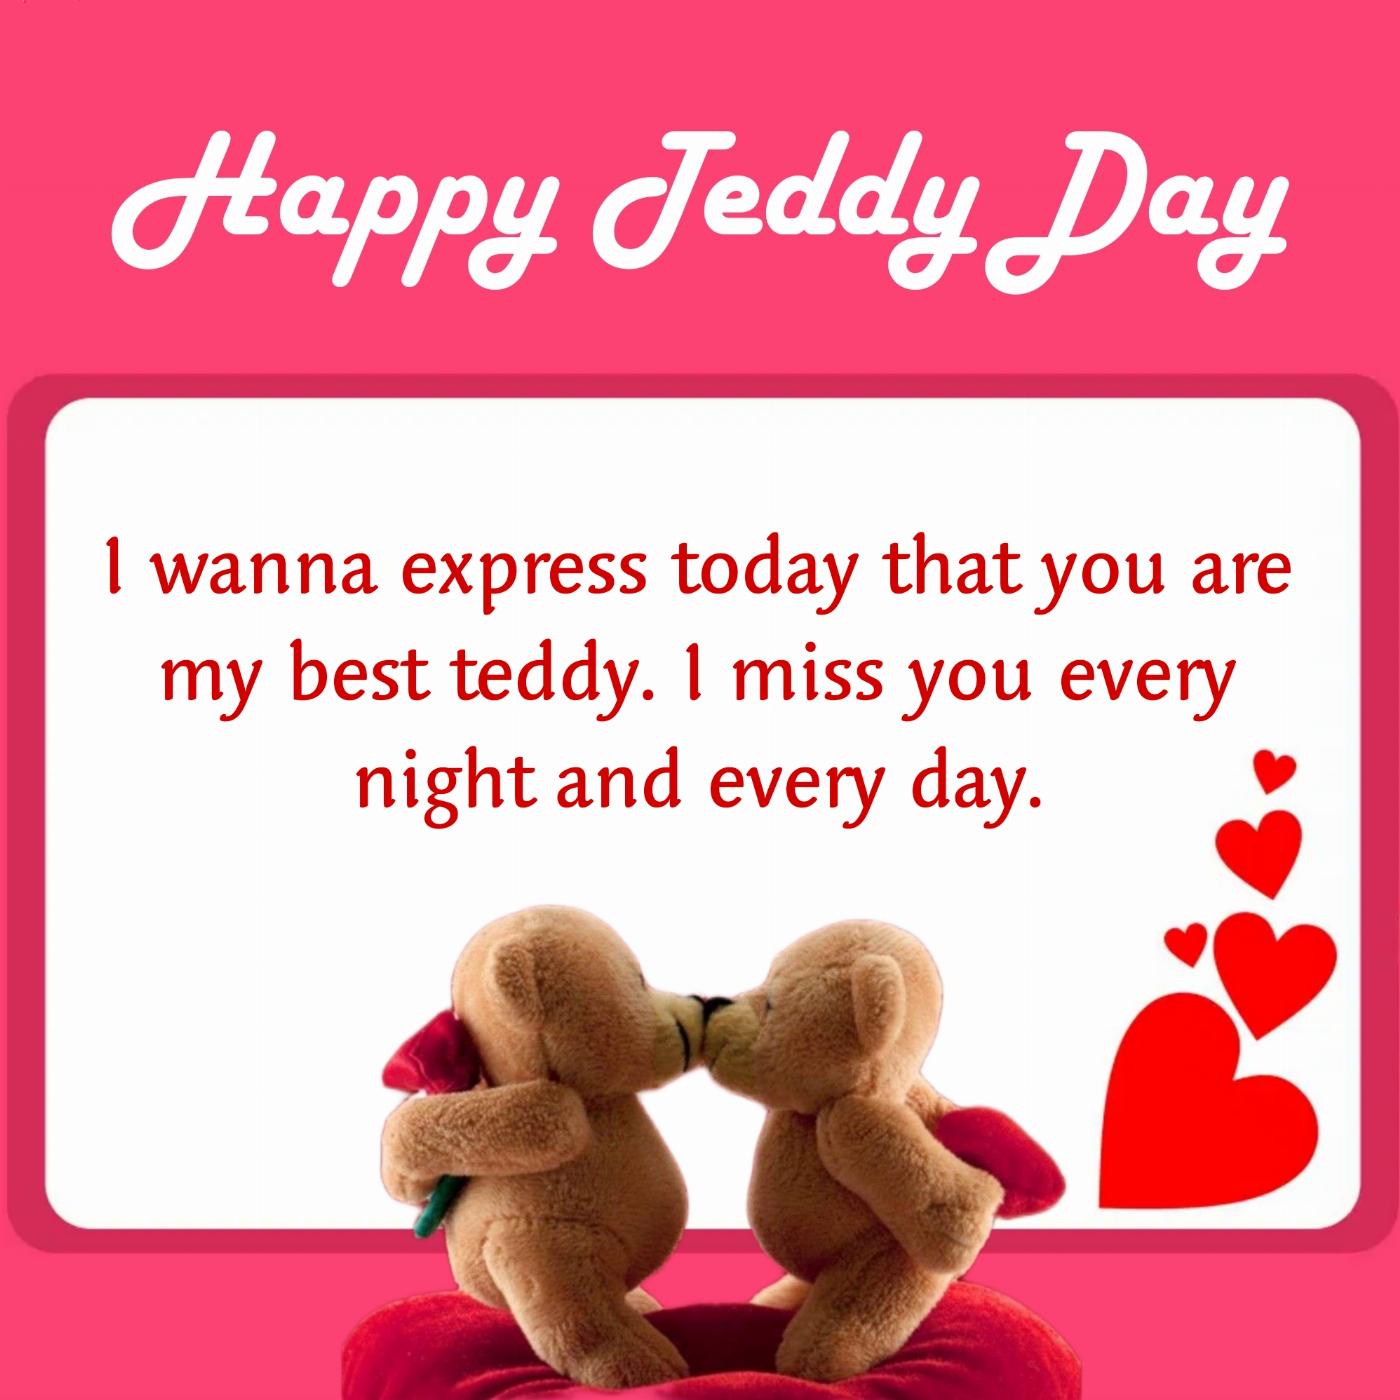 I wanna express today that you are my best teddy